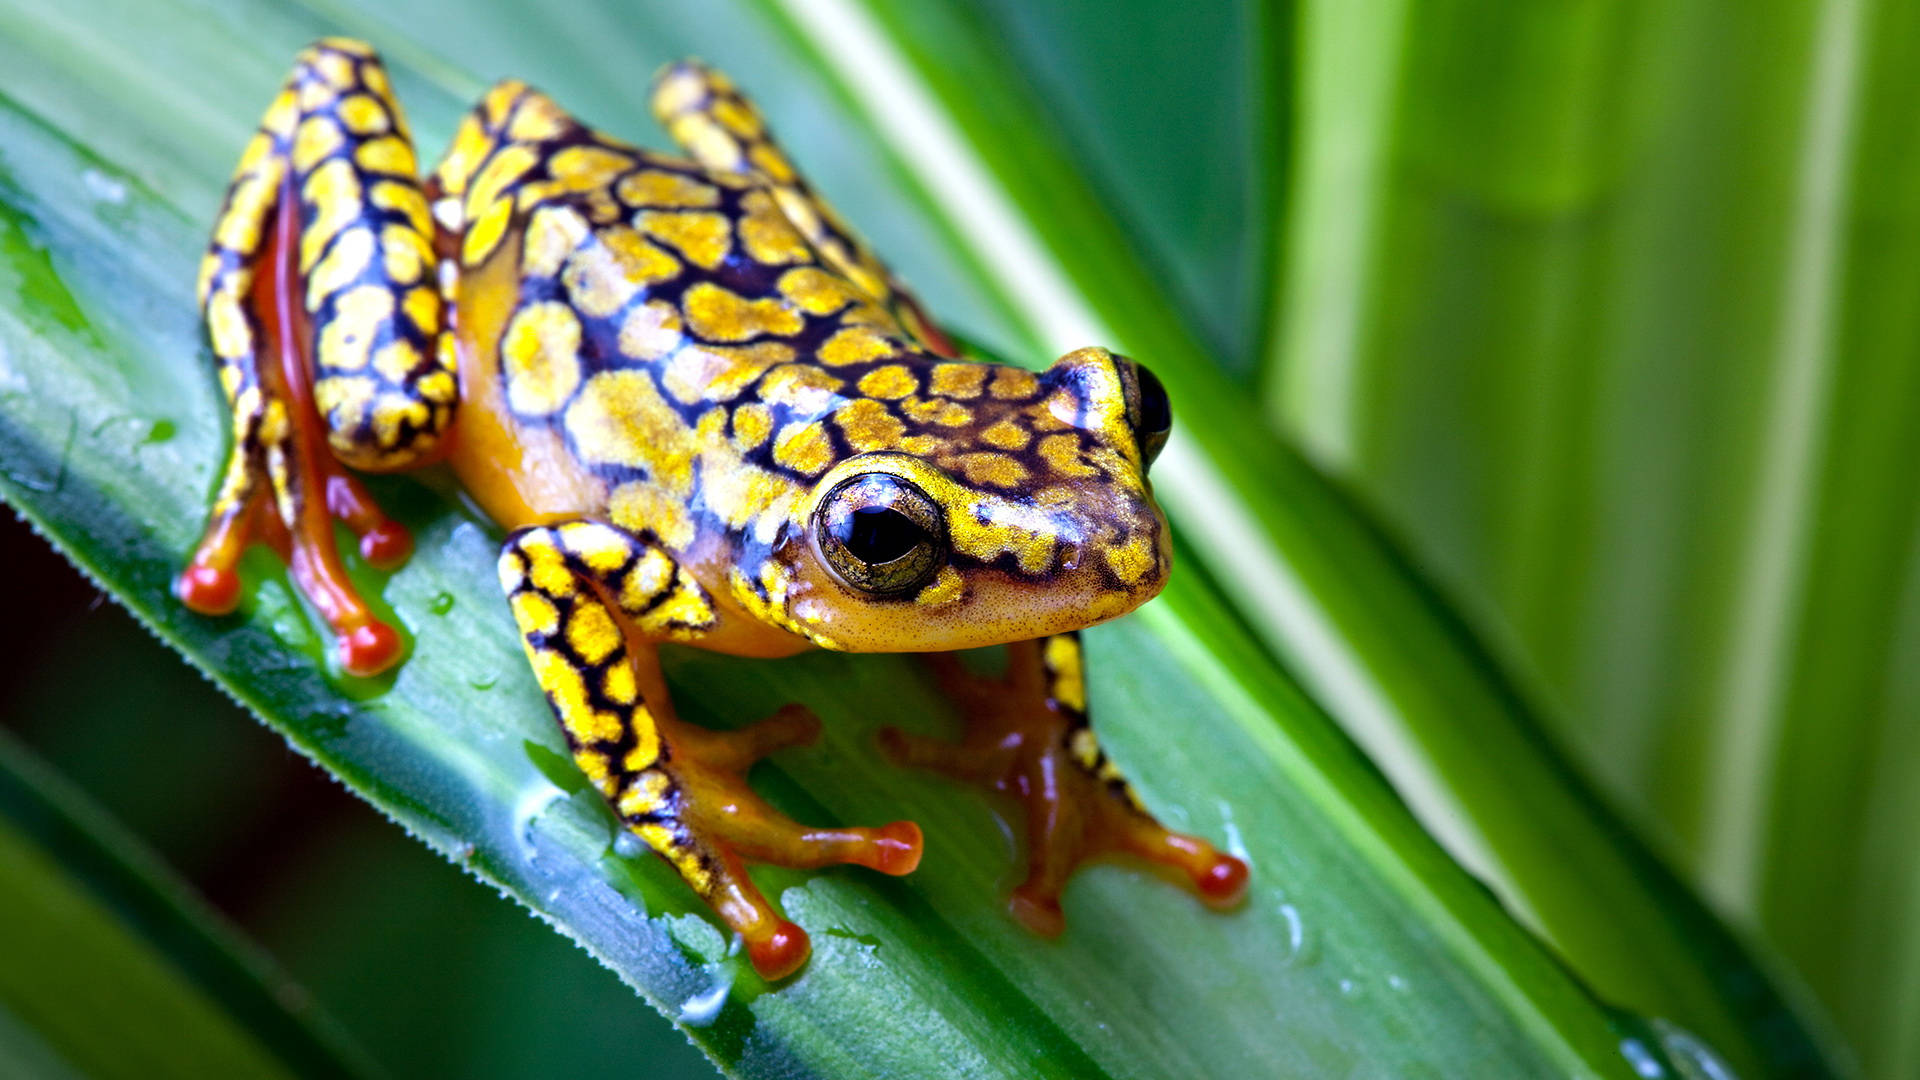 Cute Frog With Yellow Dots Pattern Wallpaper